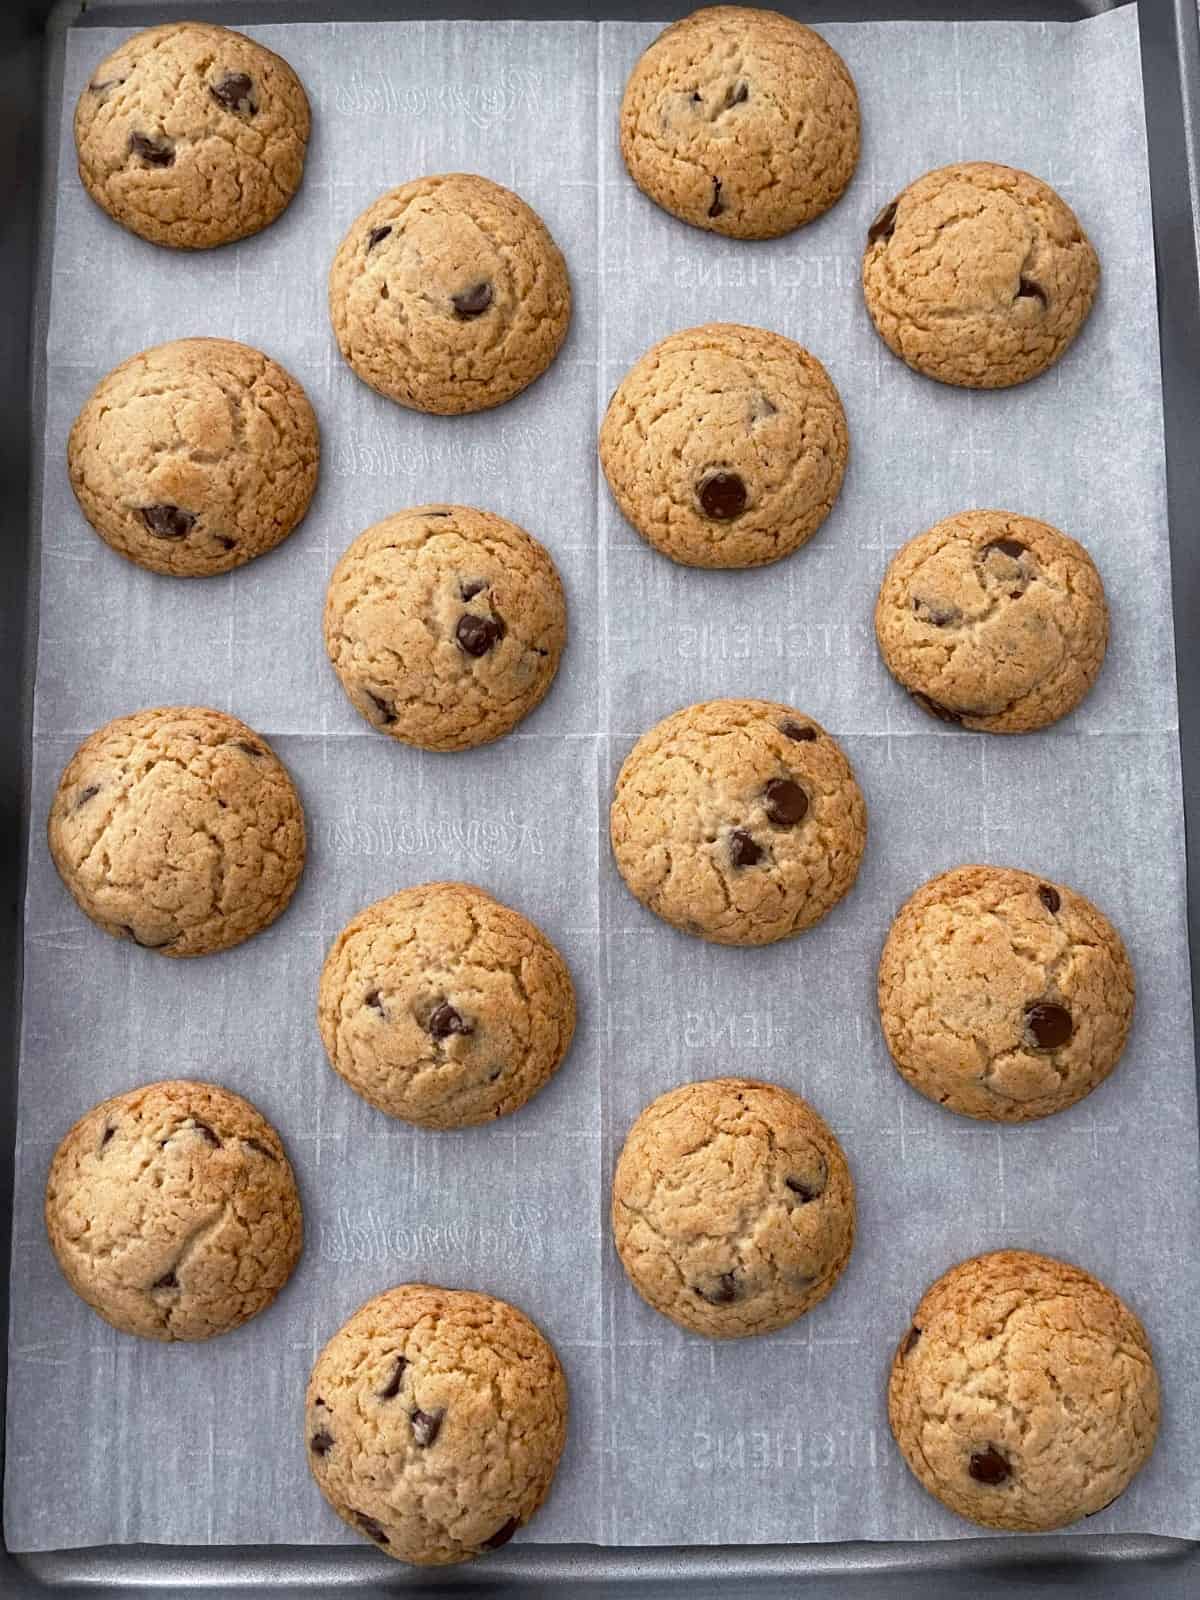 Fresh baked Halo Top peanut butter chocolate chip cookies on parchment-lined baking sheet.